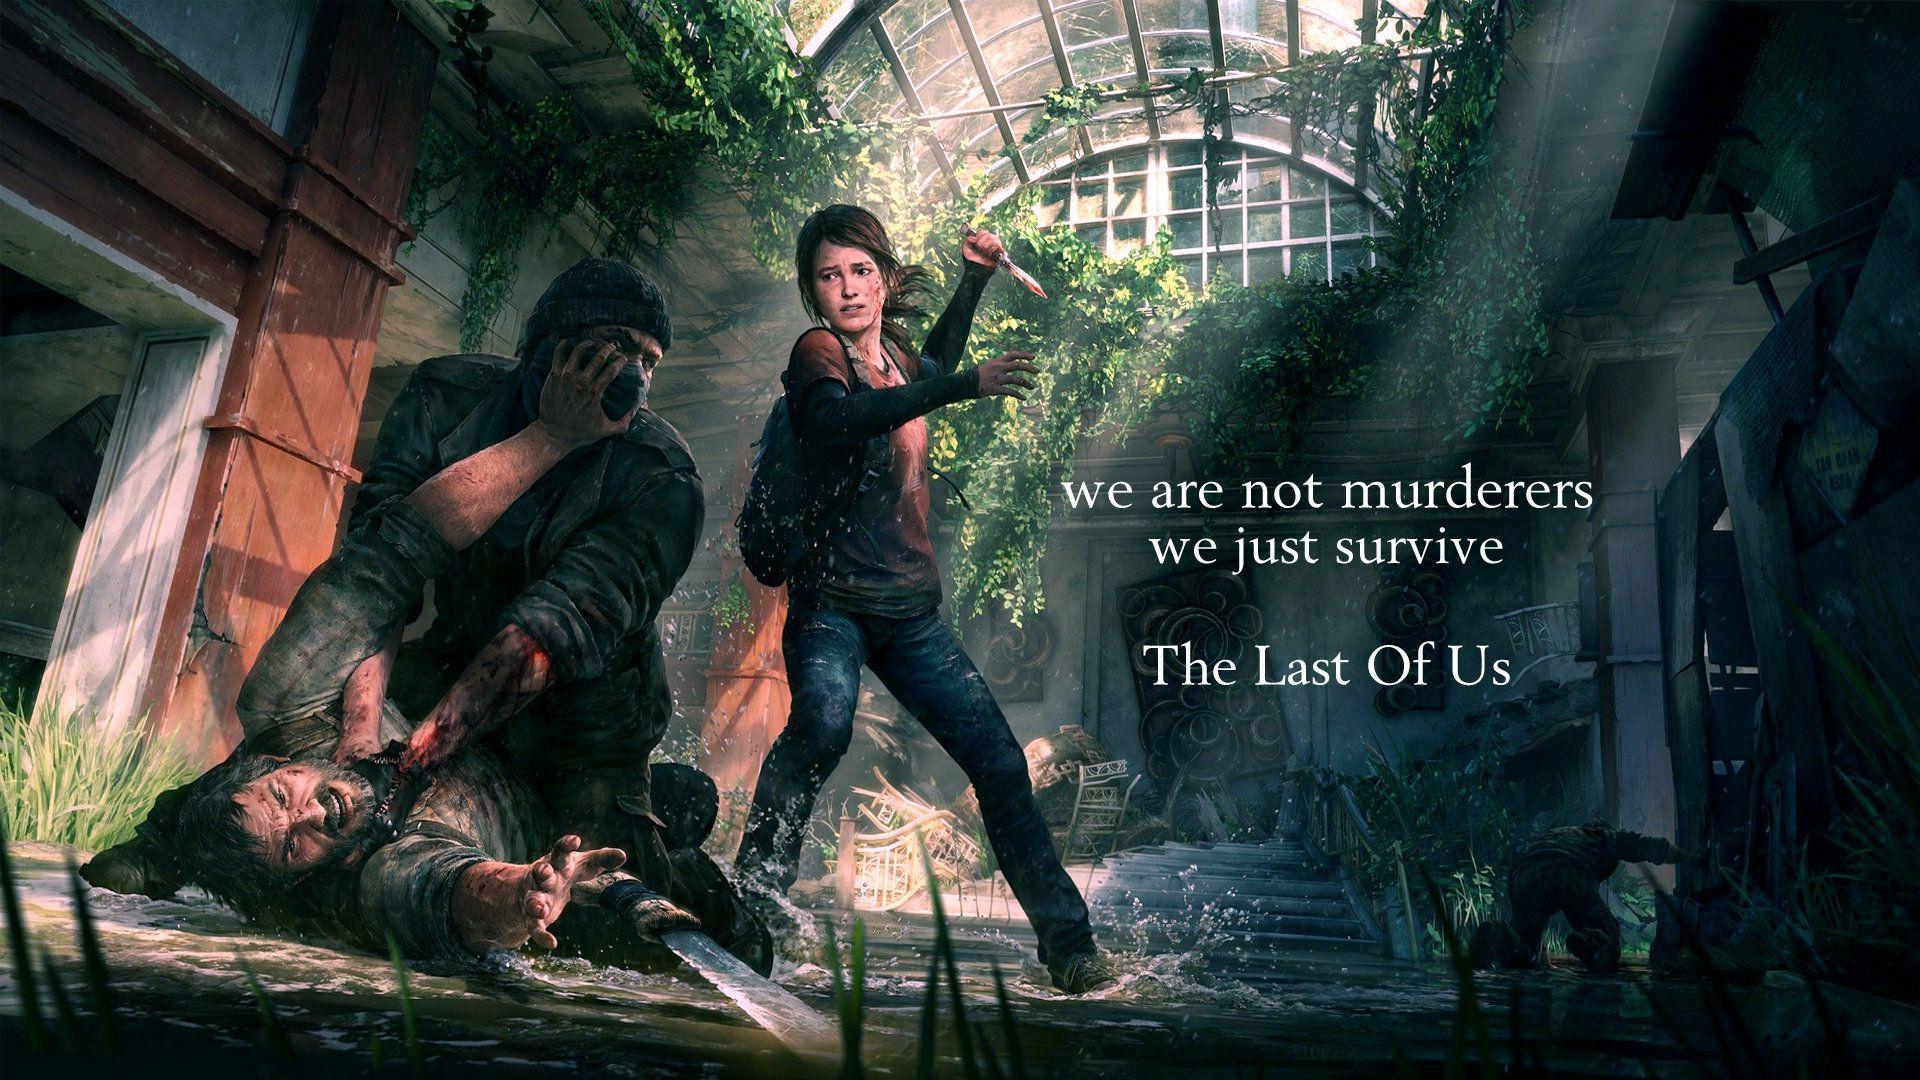 Mostly TLOU desktop wallpaper, but I added some of my favourites